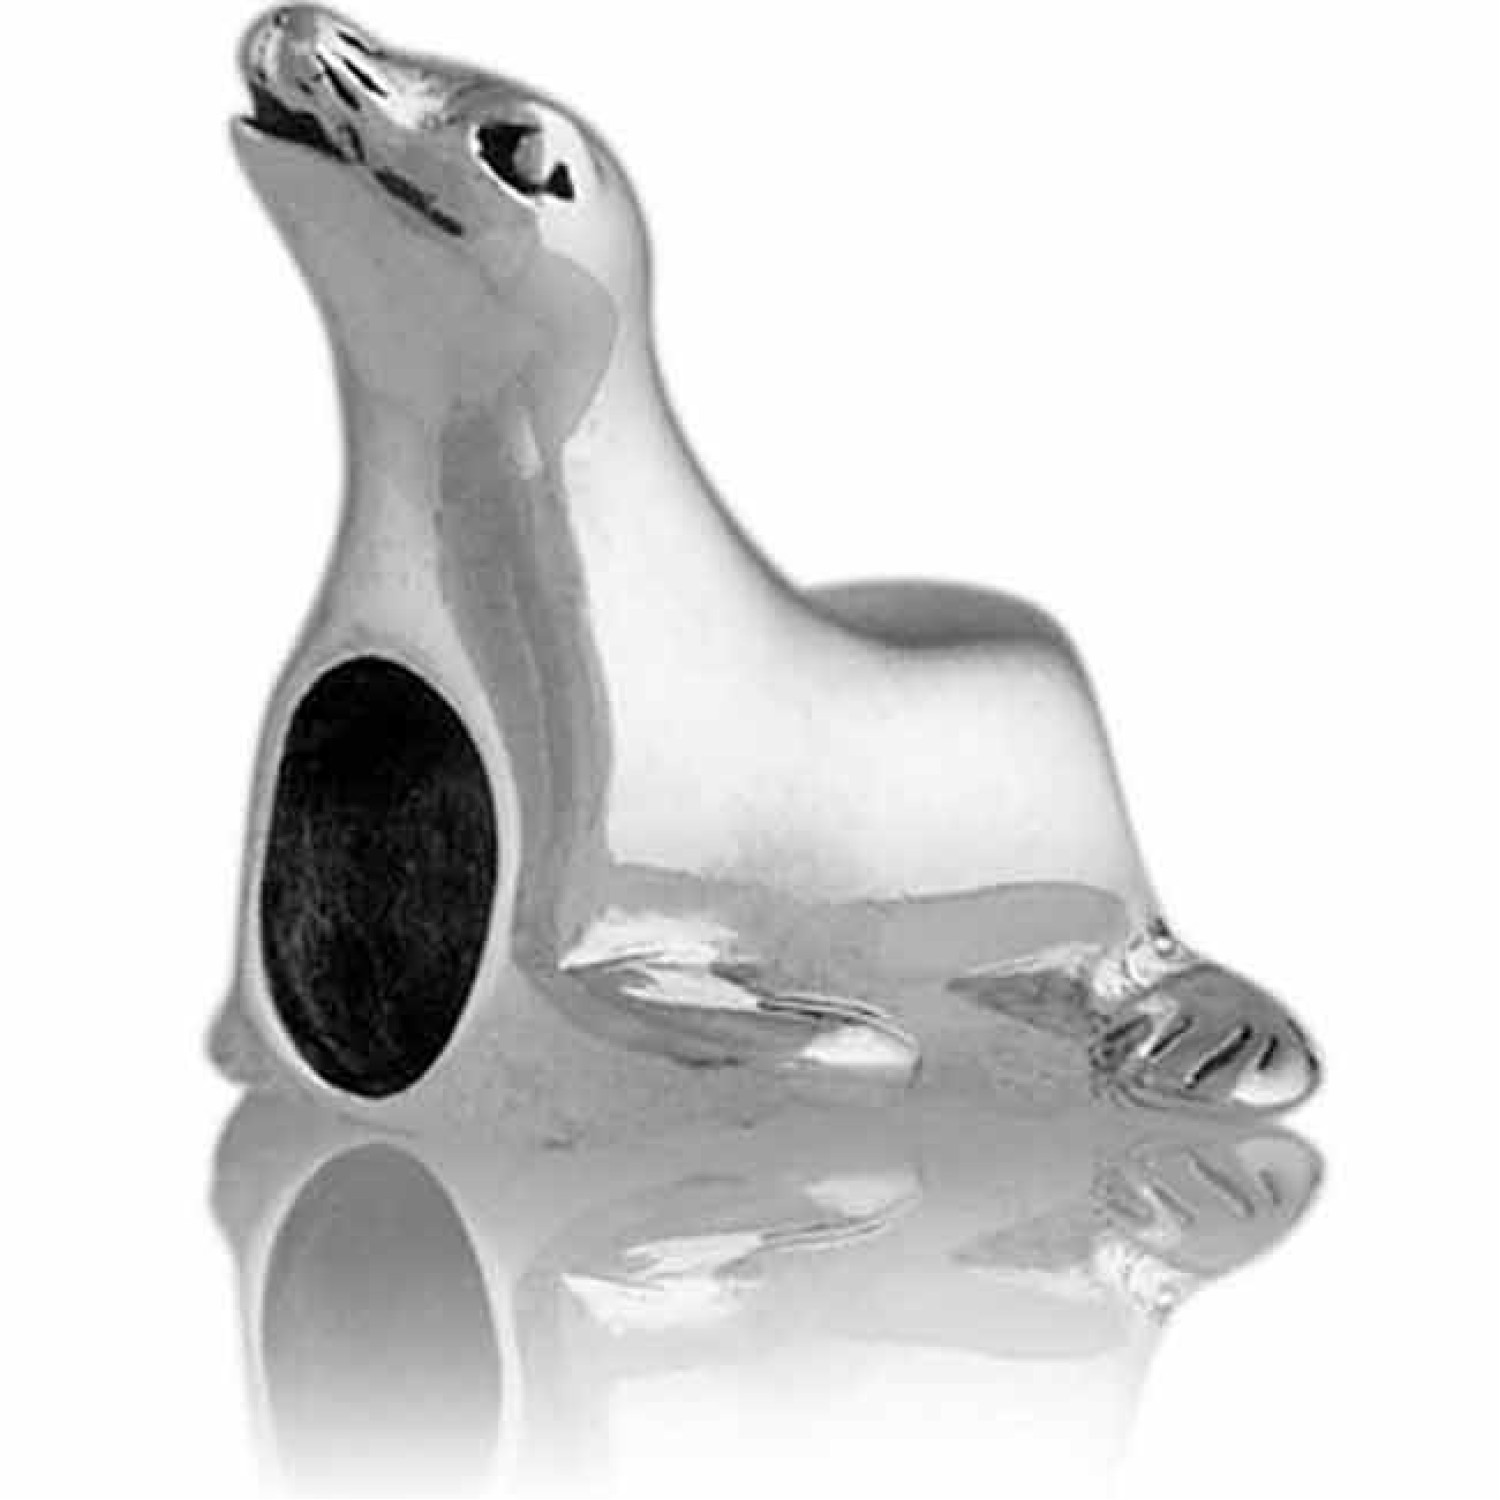 LK122 - Evolve NZ Charms Seal. LK122 - Evolve NZ Charms Seal  This baby seal pup begins life as a little ball of fur – it plays and frolics with its fellow seals venturing in and out of the ocean where it transforms into a sleek and majesti @christies.onl